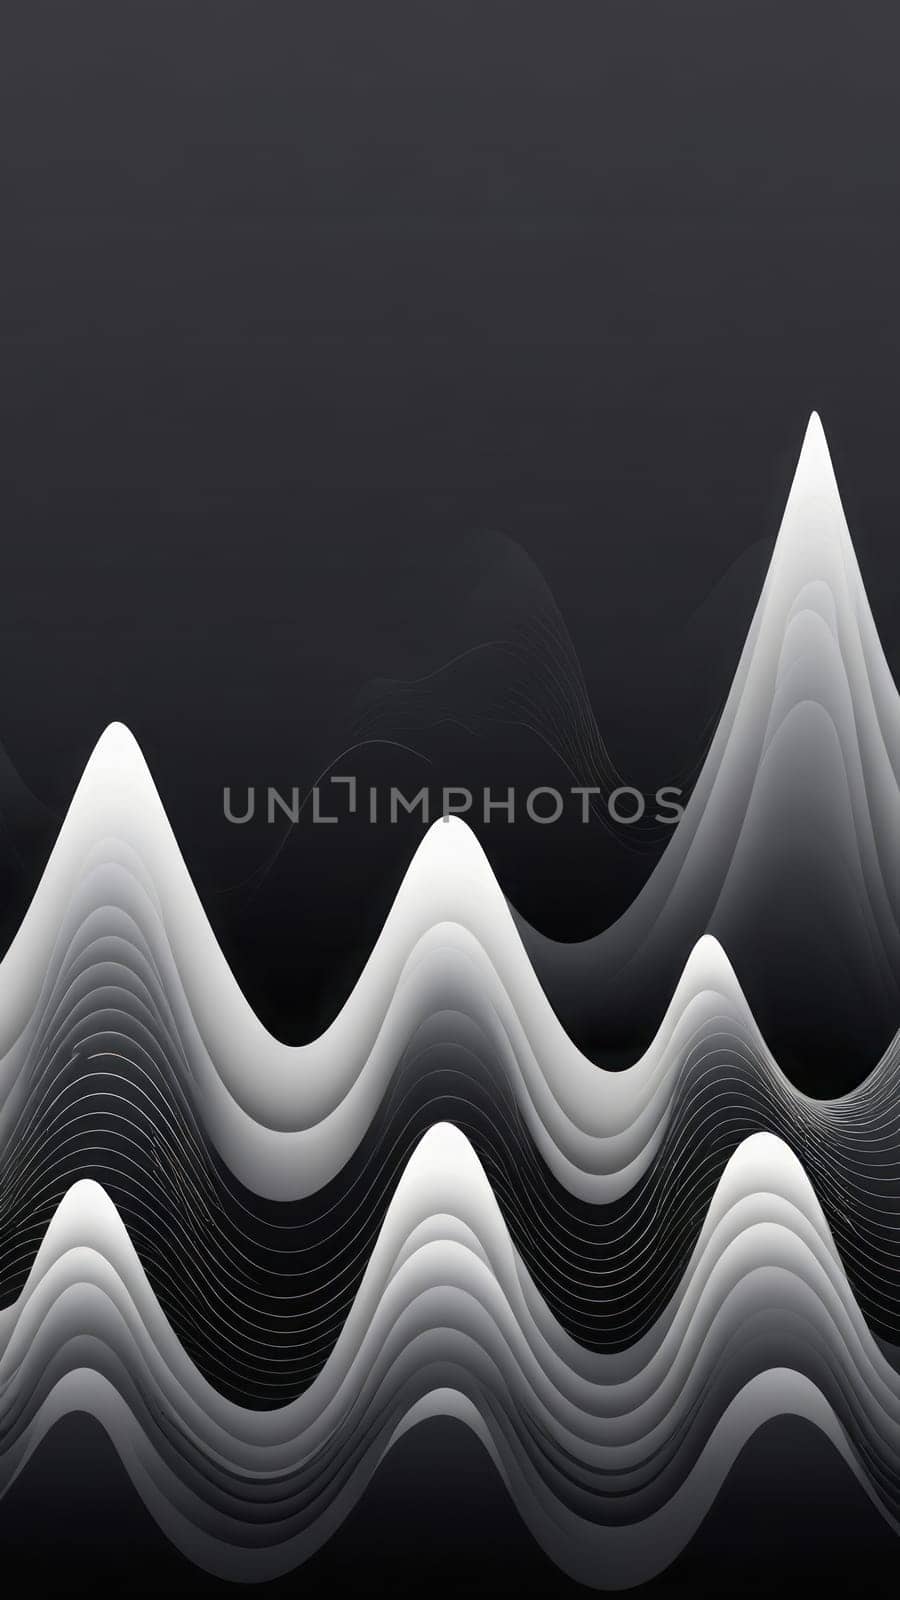 Creativity in paints from Waveform shapes and black by nkotlyar